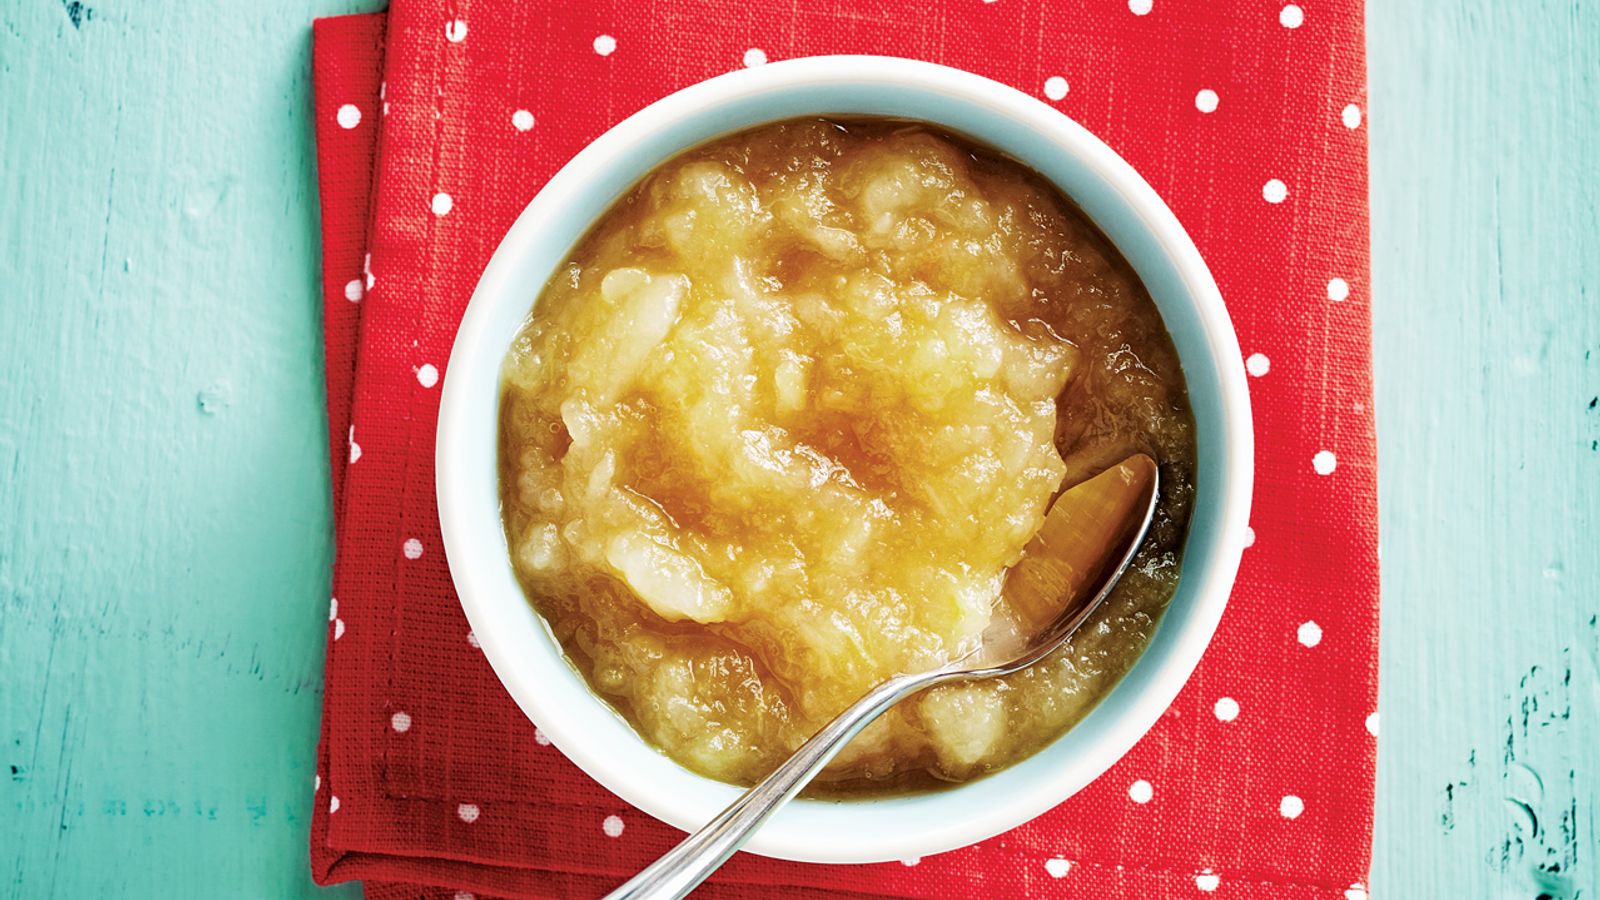 How to make apple sauce at home—